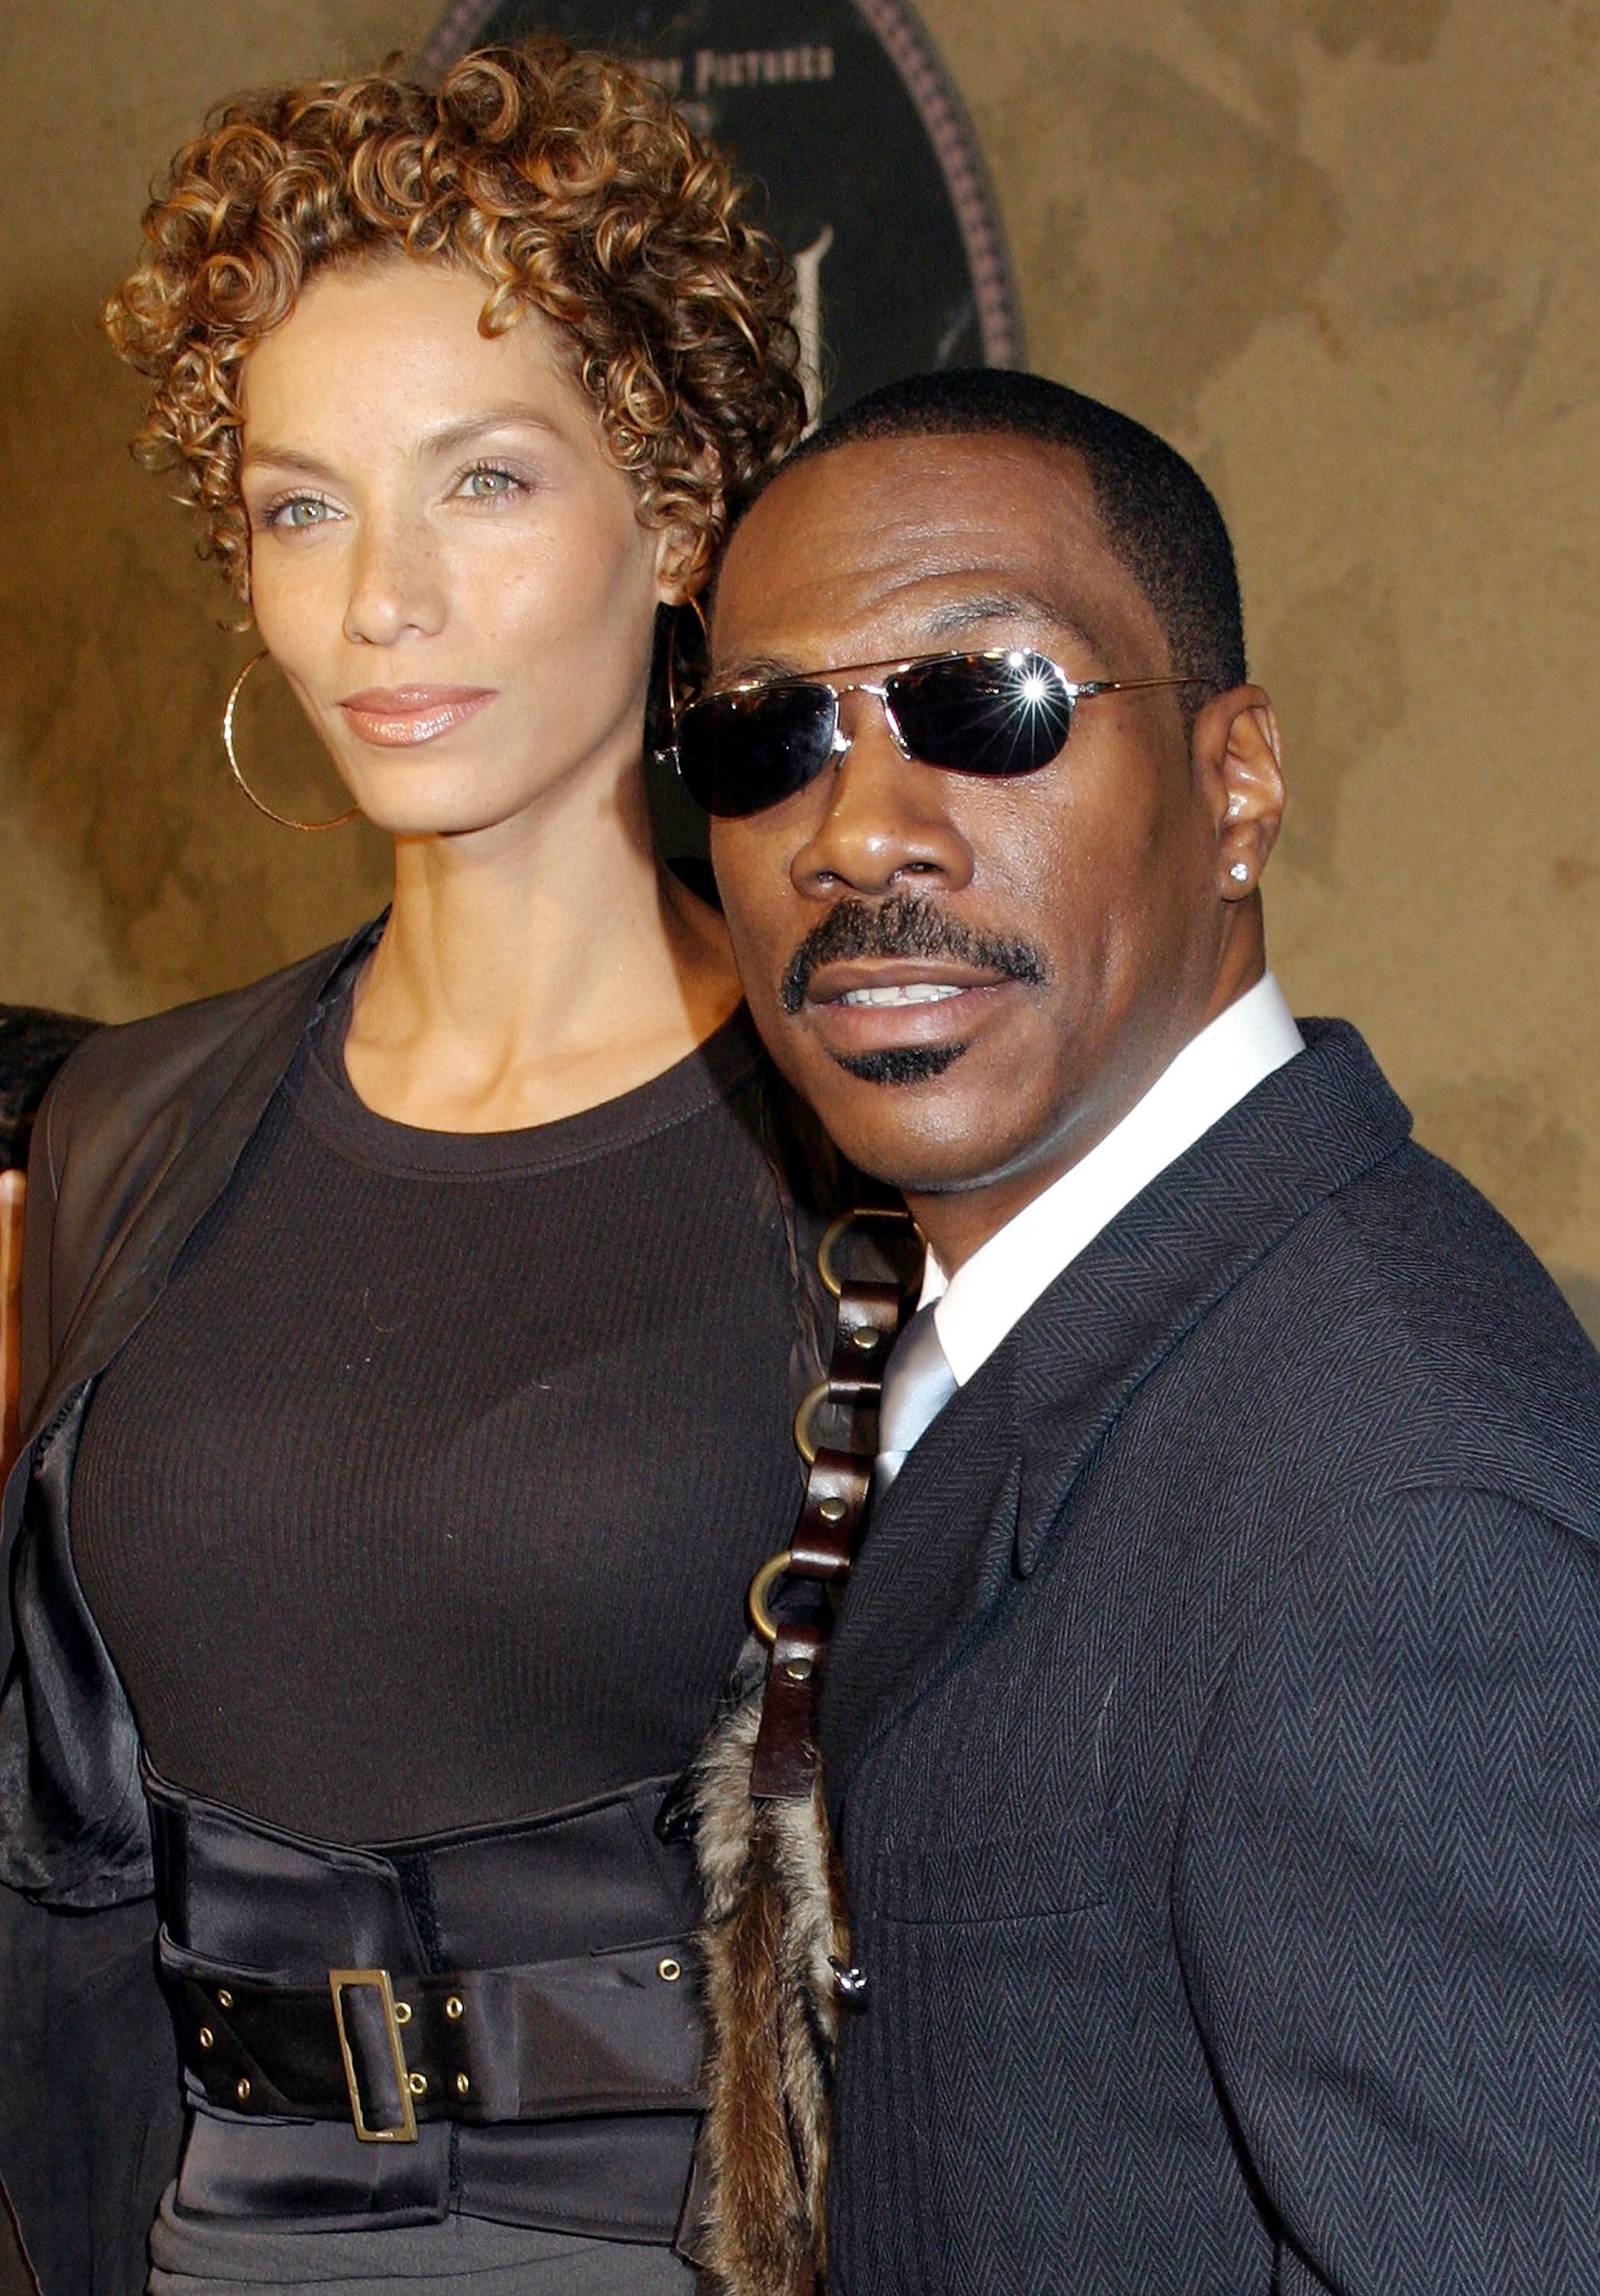 Eddie Murphy and Nicole Murphy at the world film premiere of "The Haunted Mansion" at the El Capitan Theatre on November 23, 2003 | Photo: Getty Images